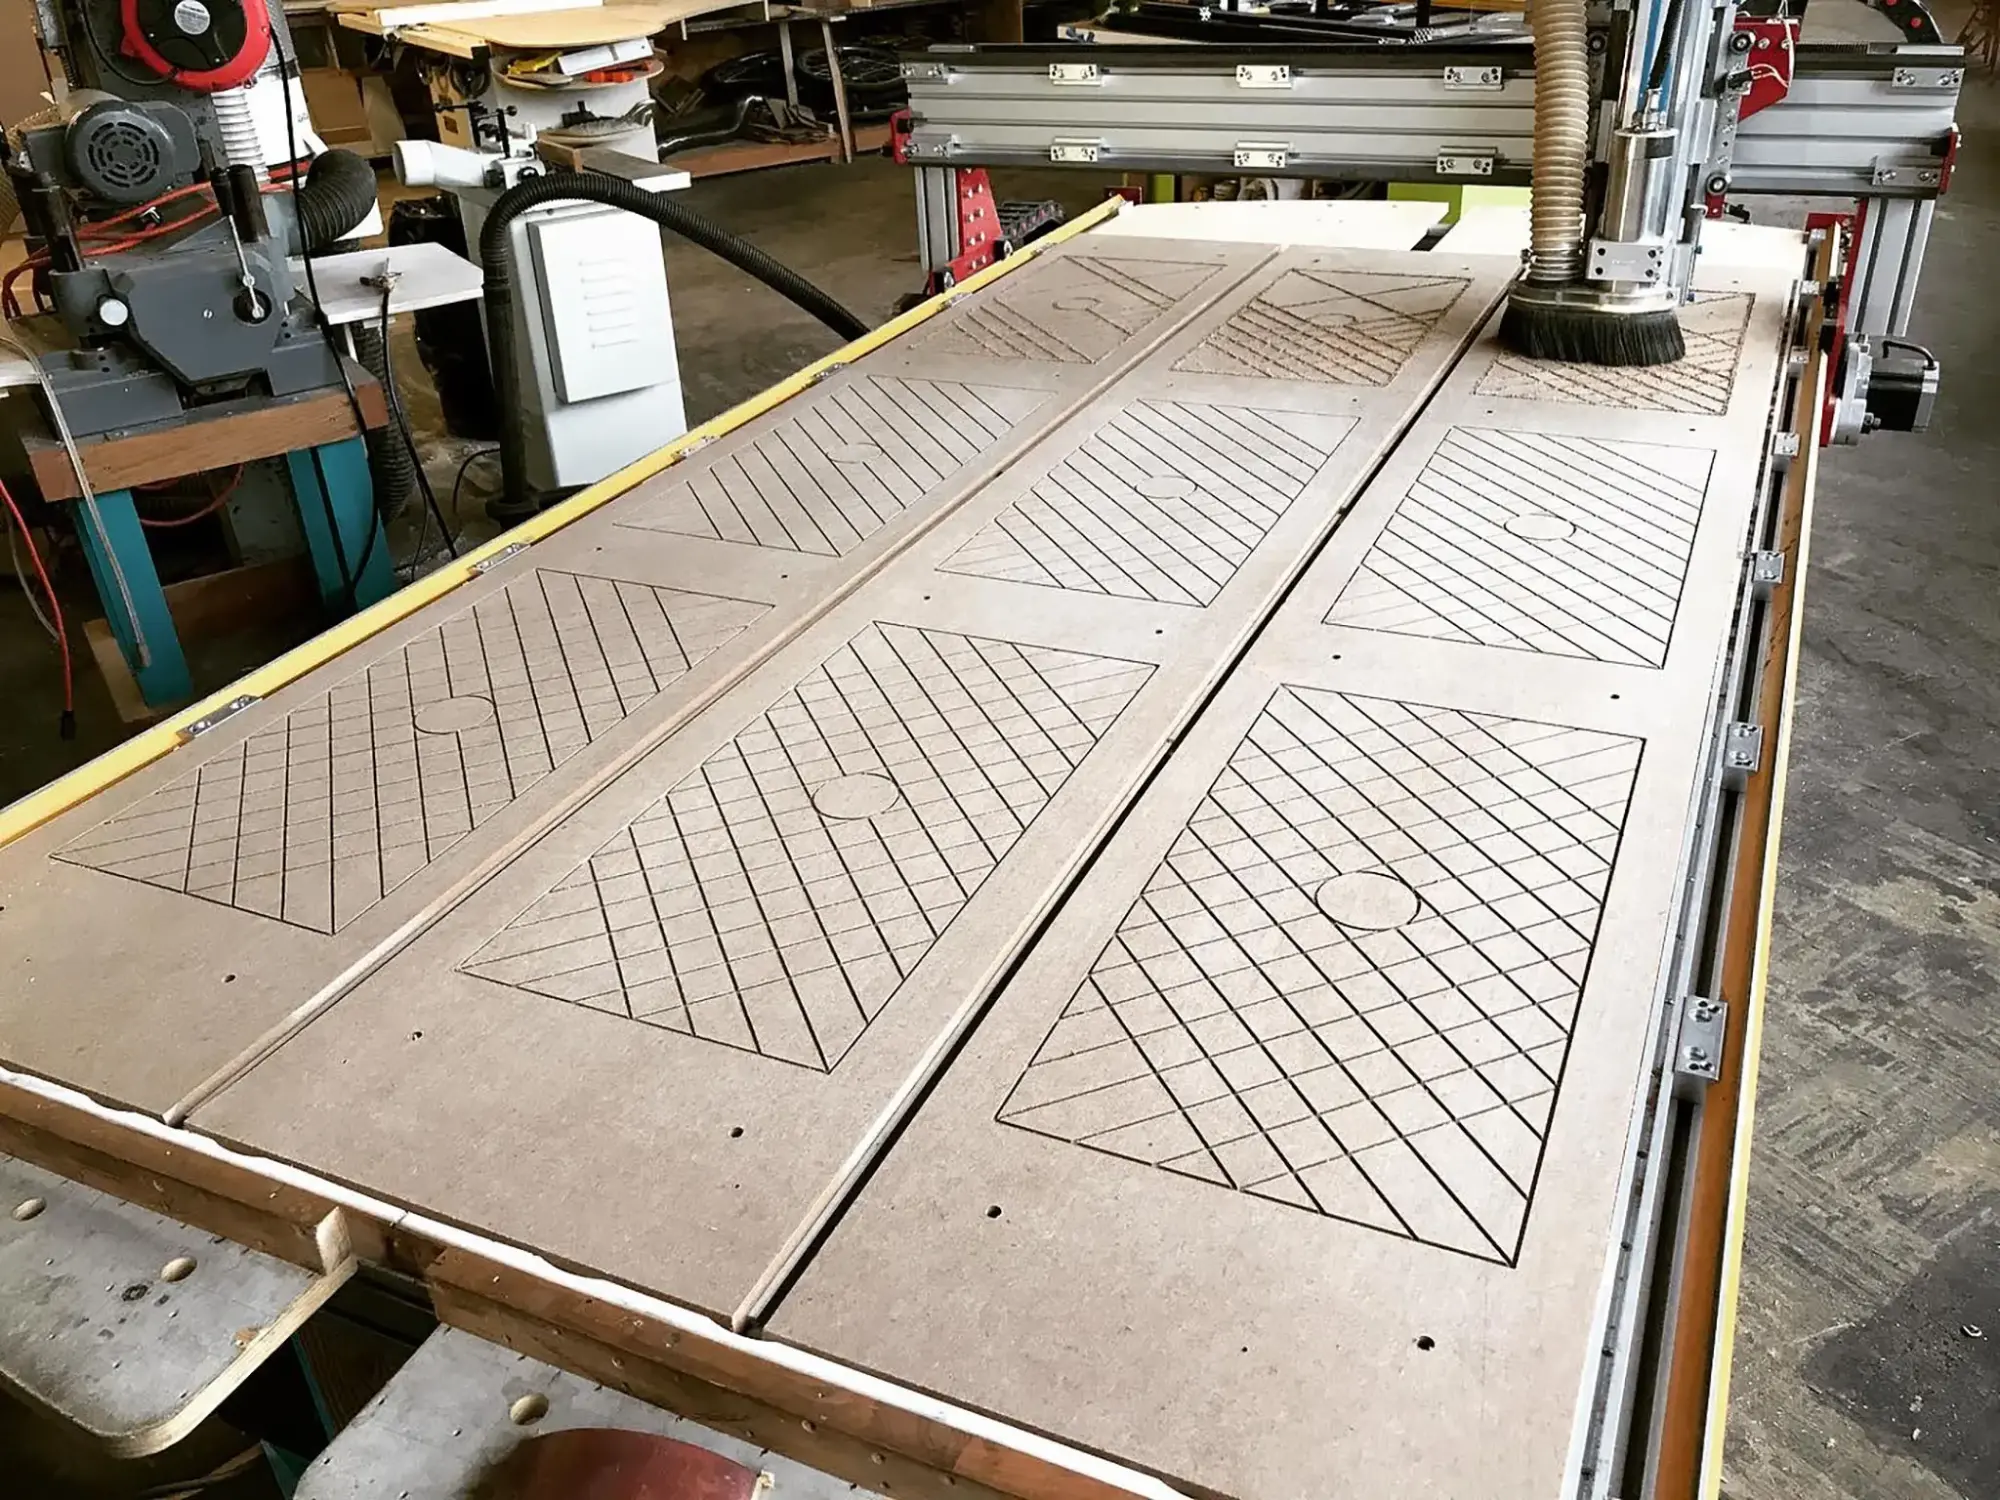 5 Advantages of Used CNC Router Parts